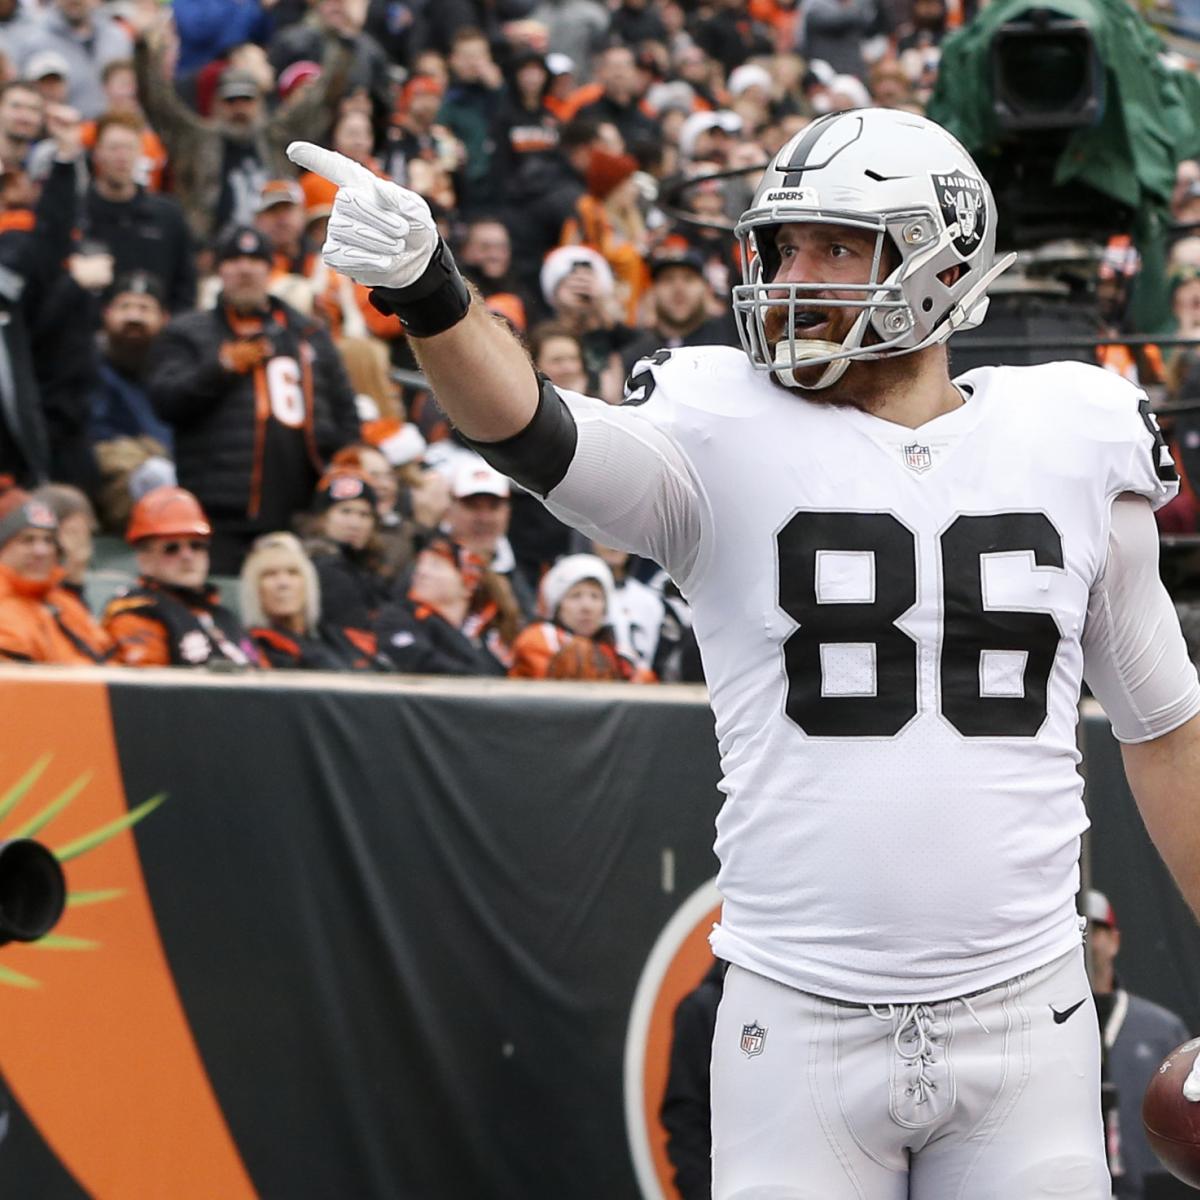 Raiders TE Lee Smith believes his father, ex-NFL player, had CTE